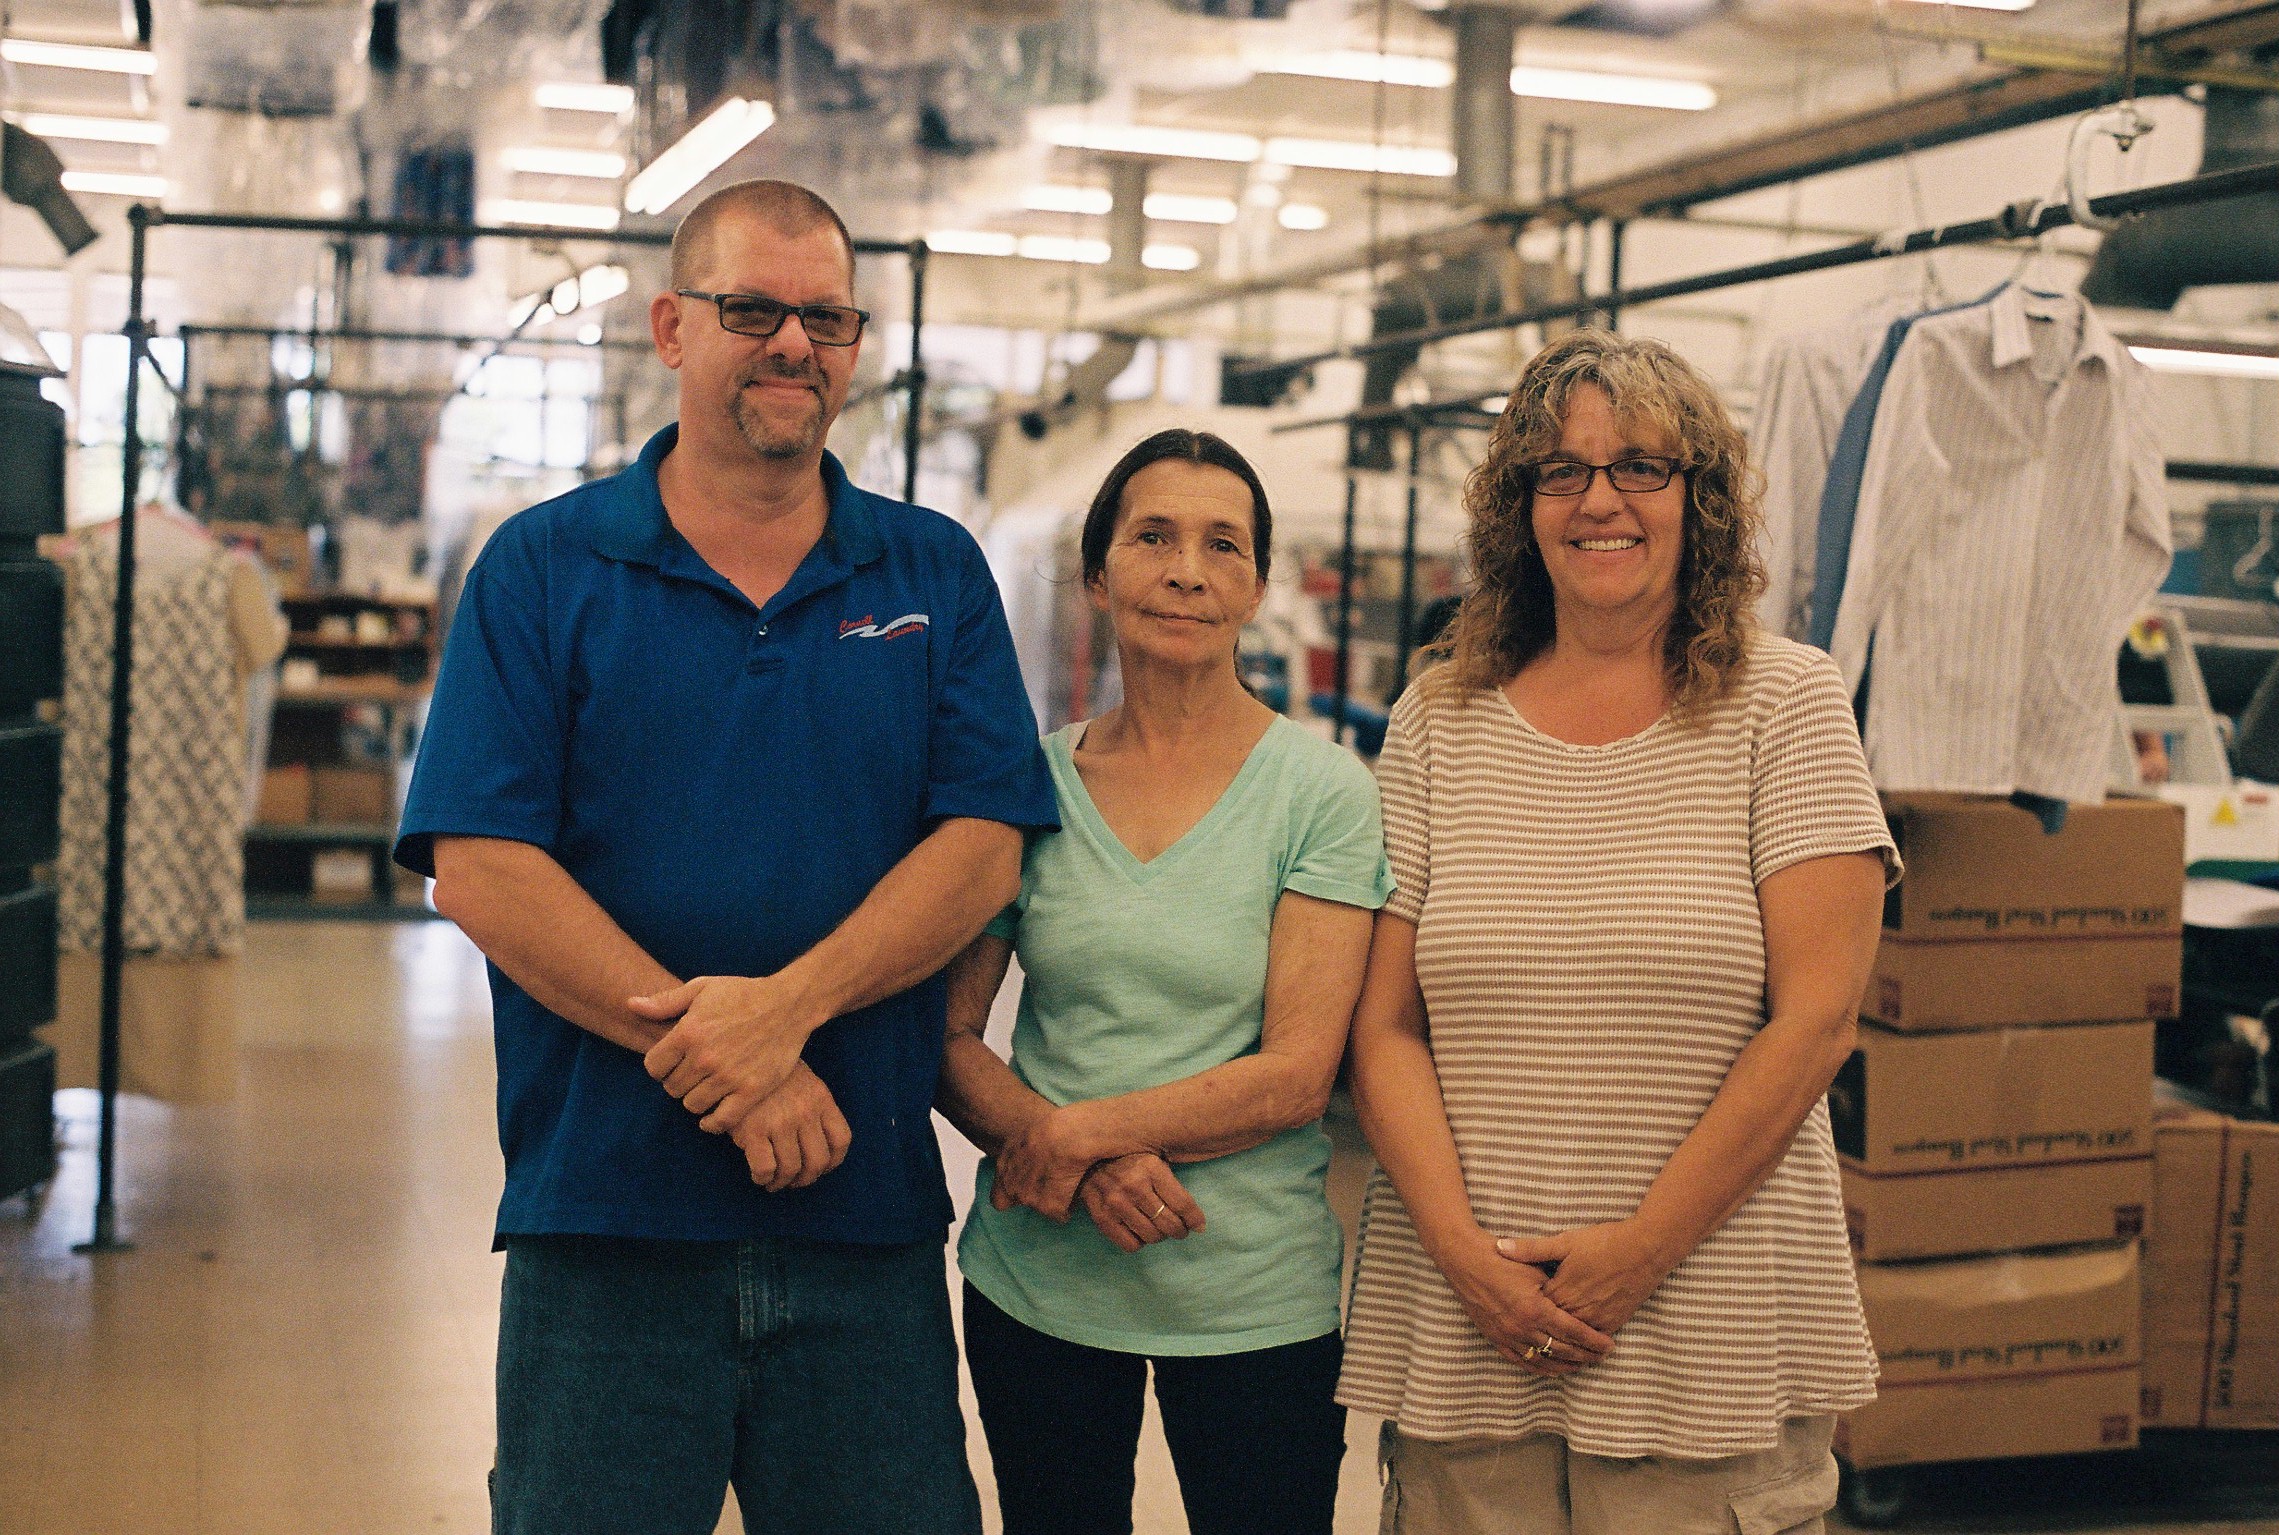 The three mall dry cleaners, Daniel, Tina and Debbie